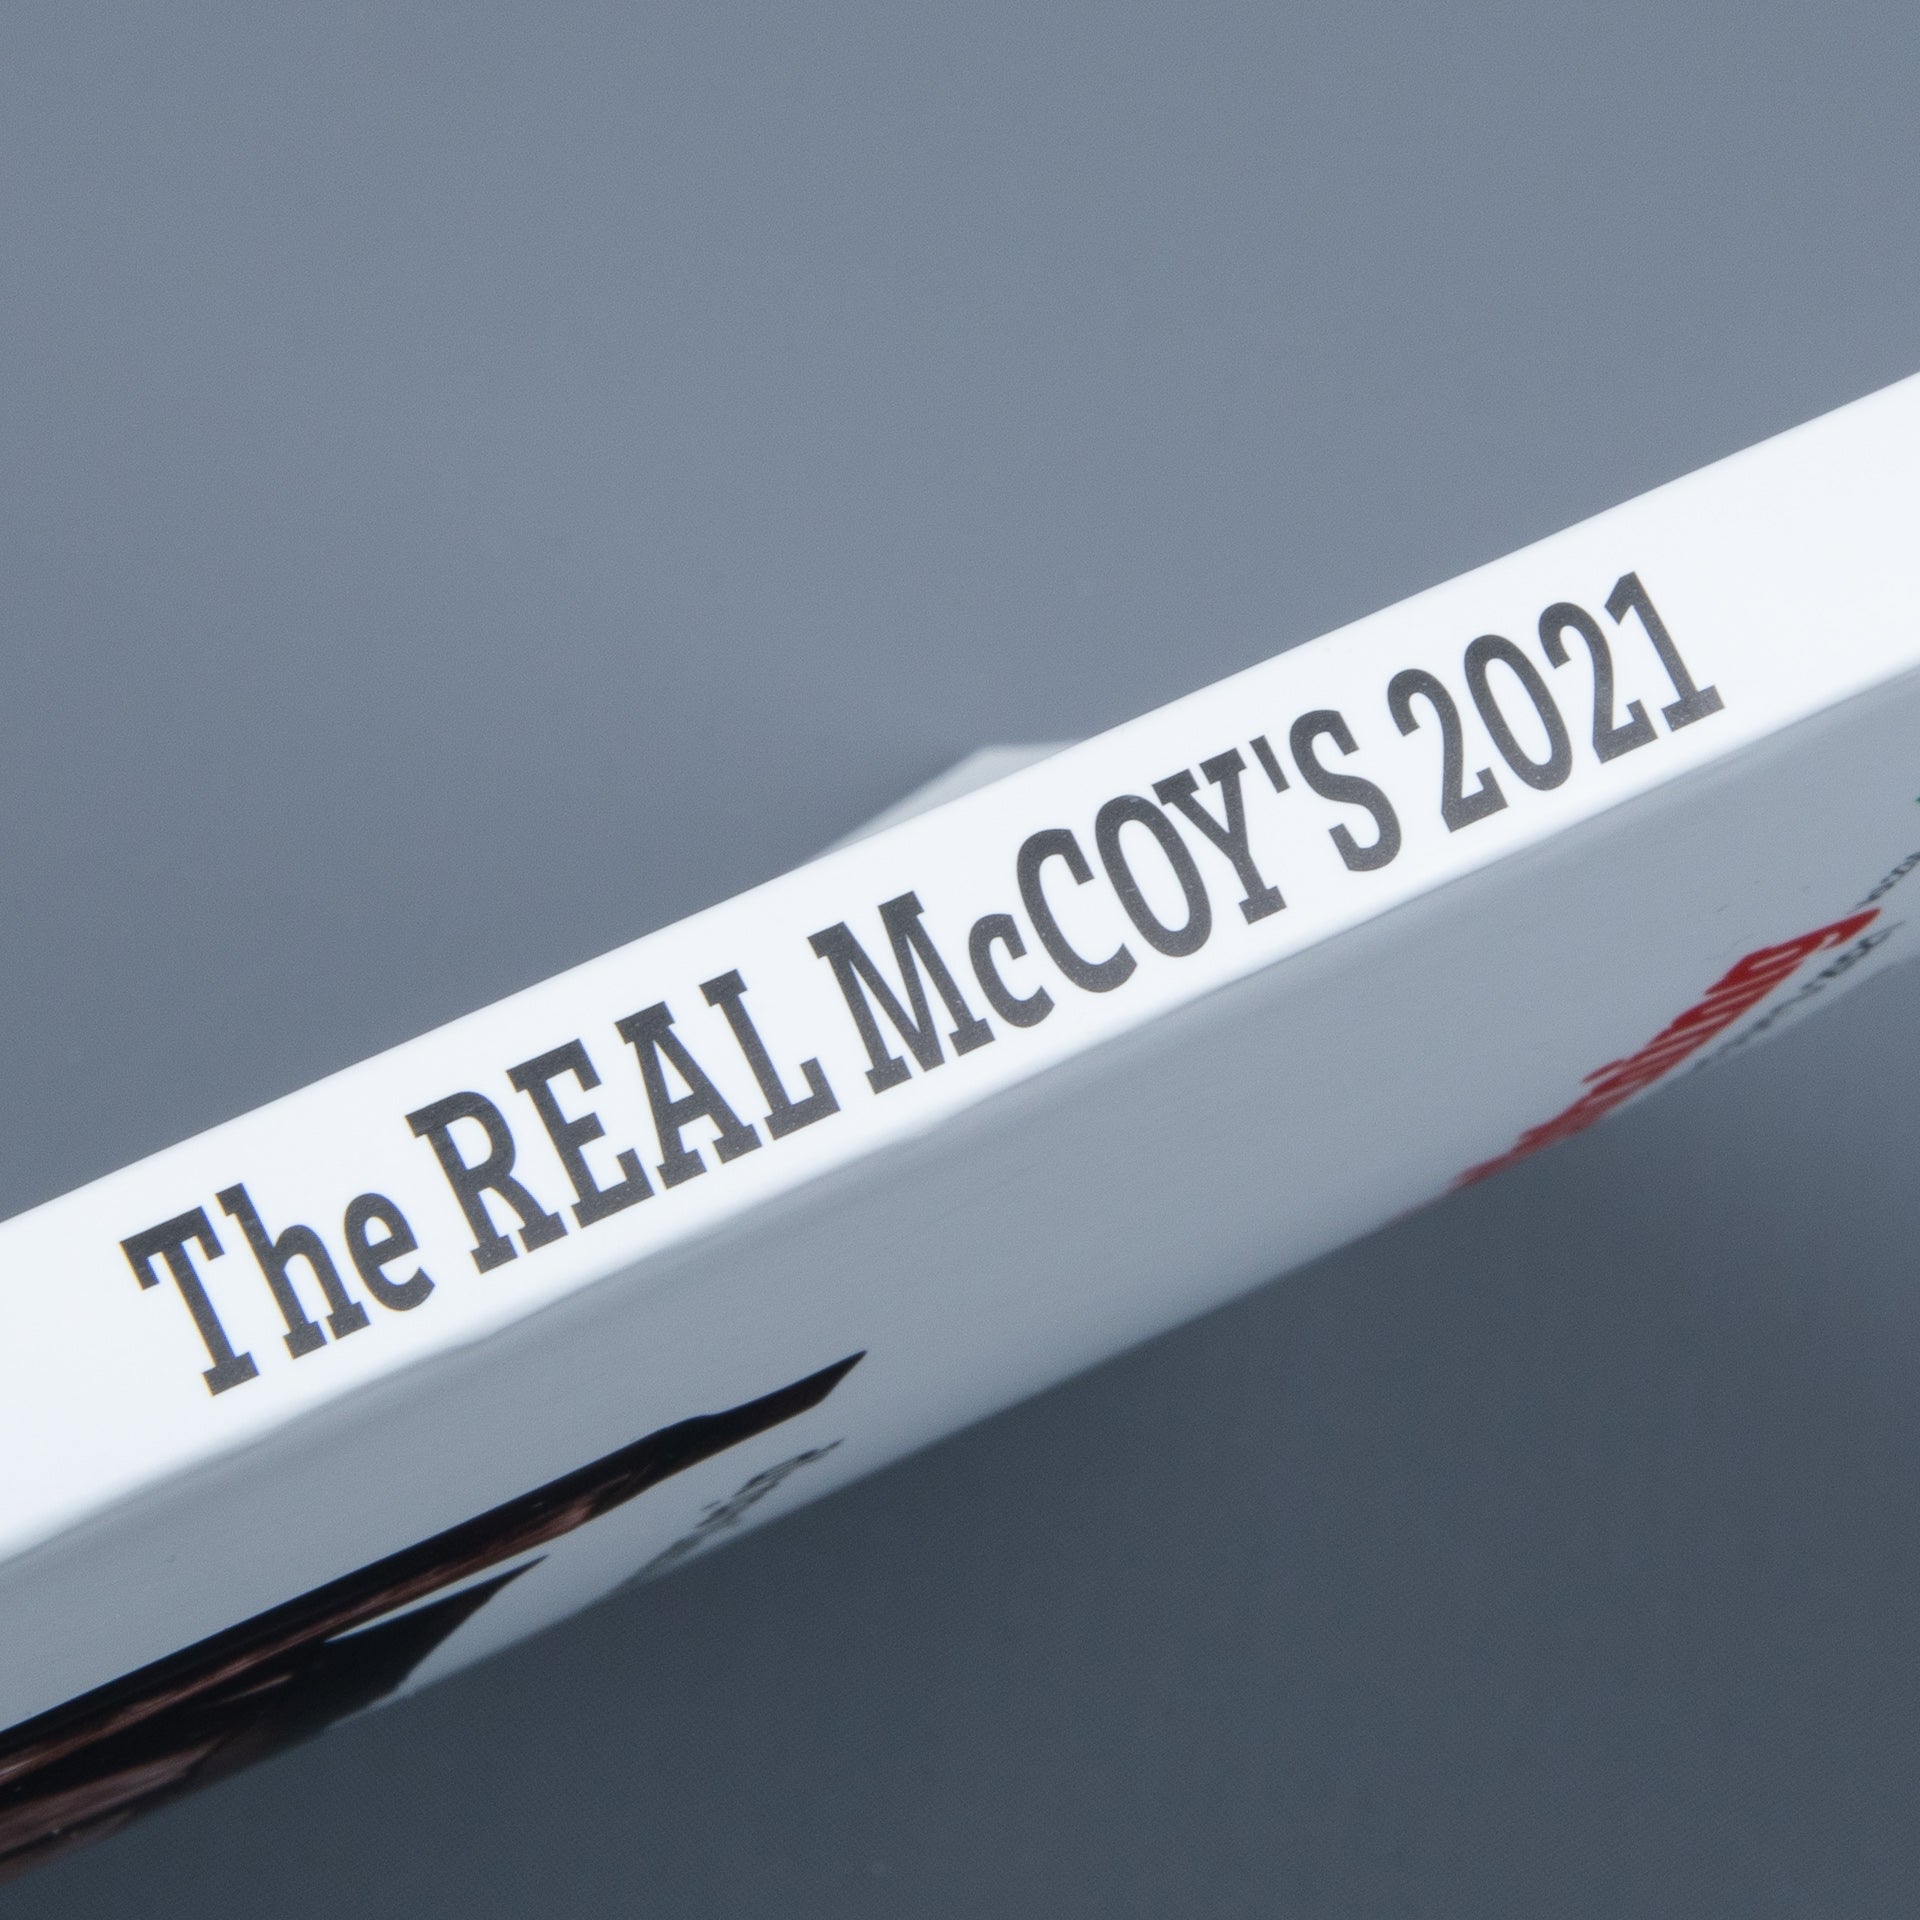 The Real McCoy&#39;s Yearbook 2021